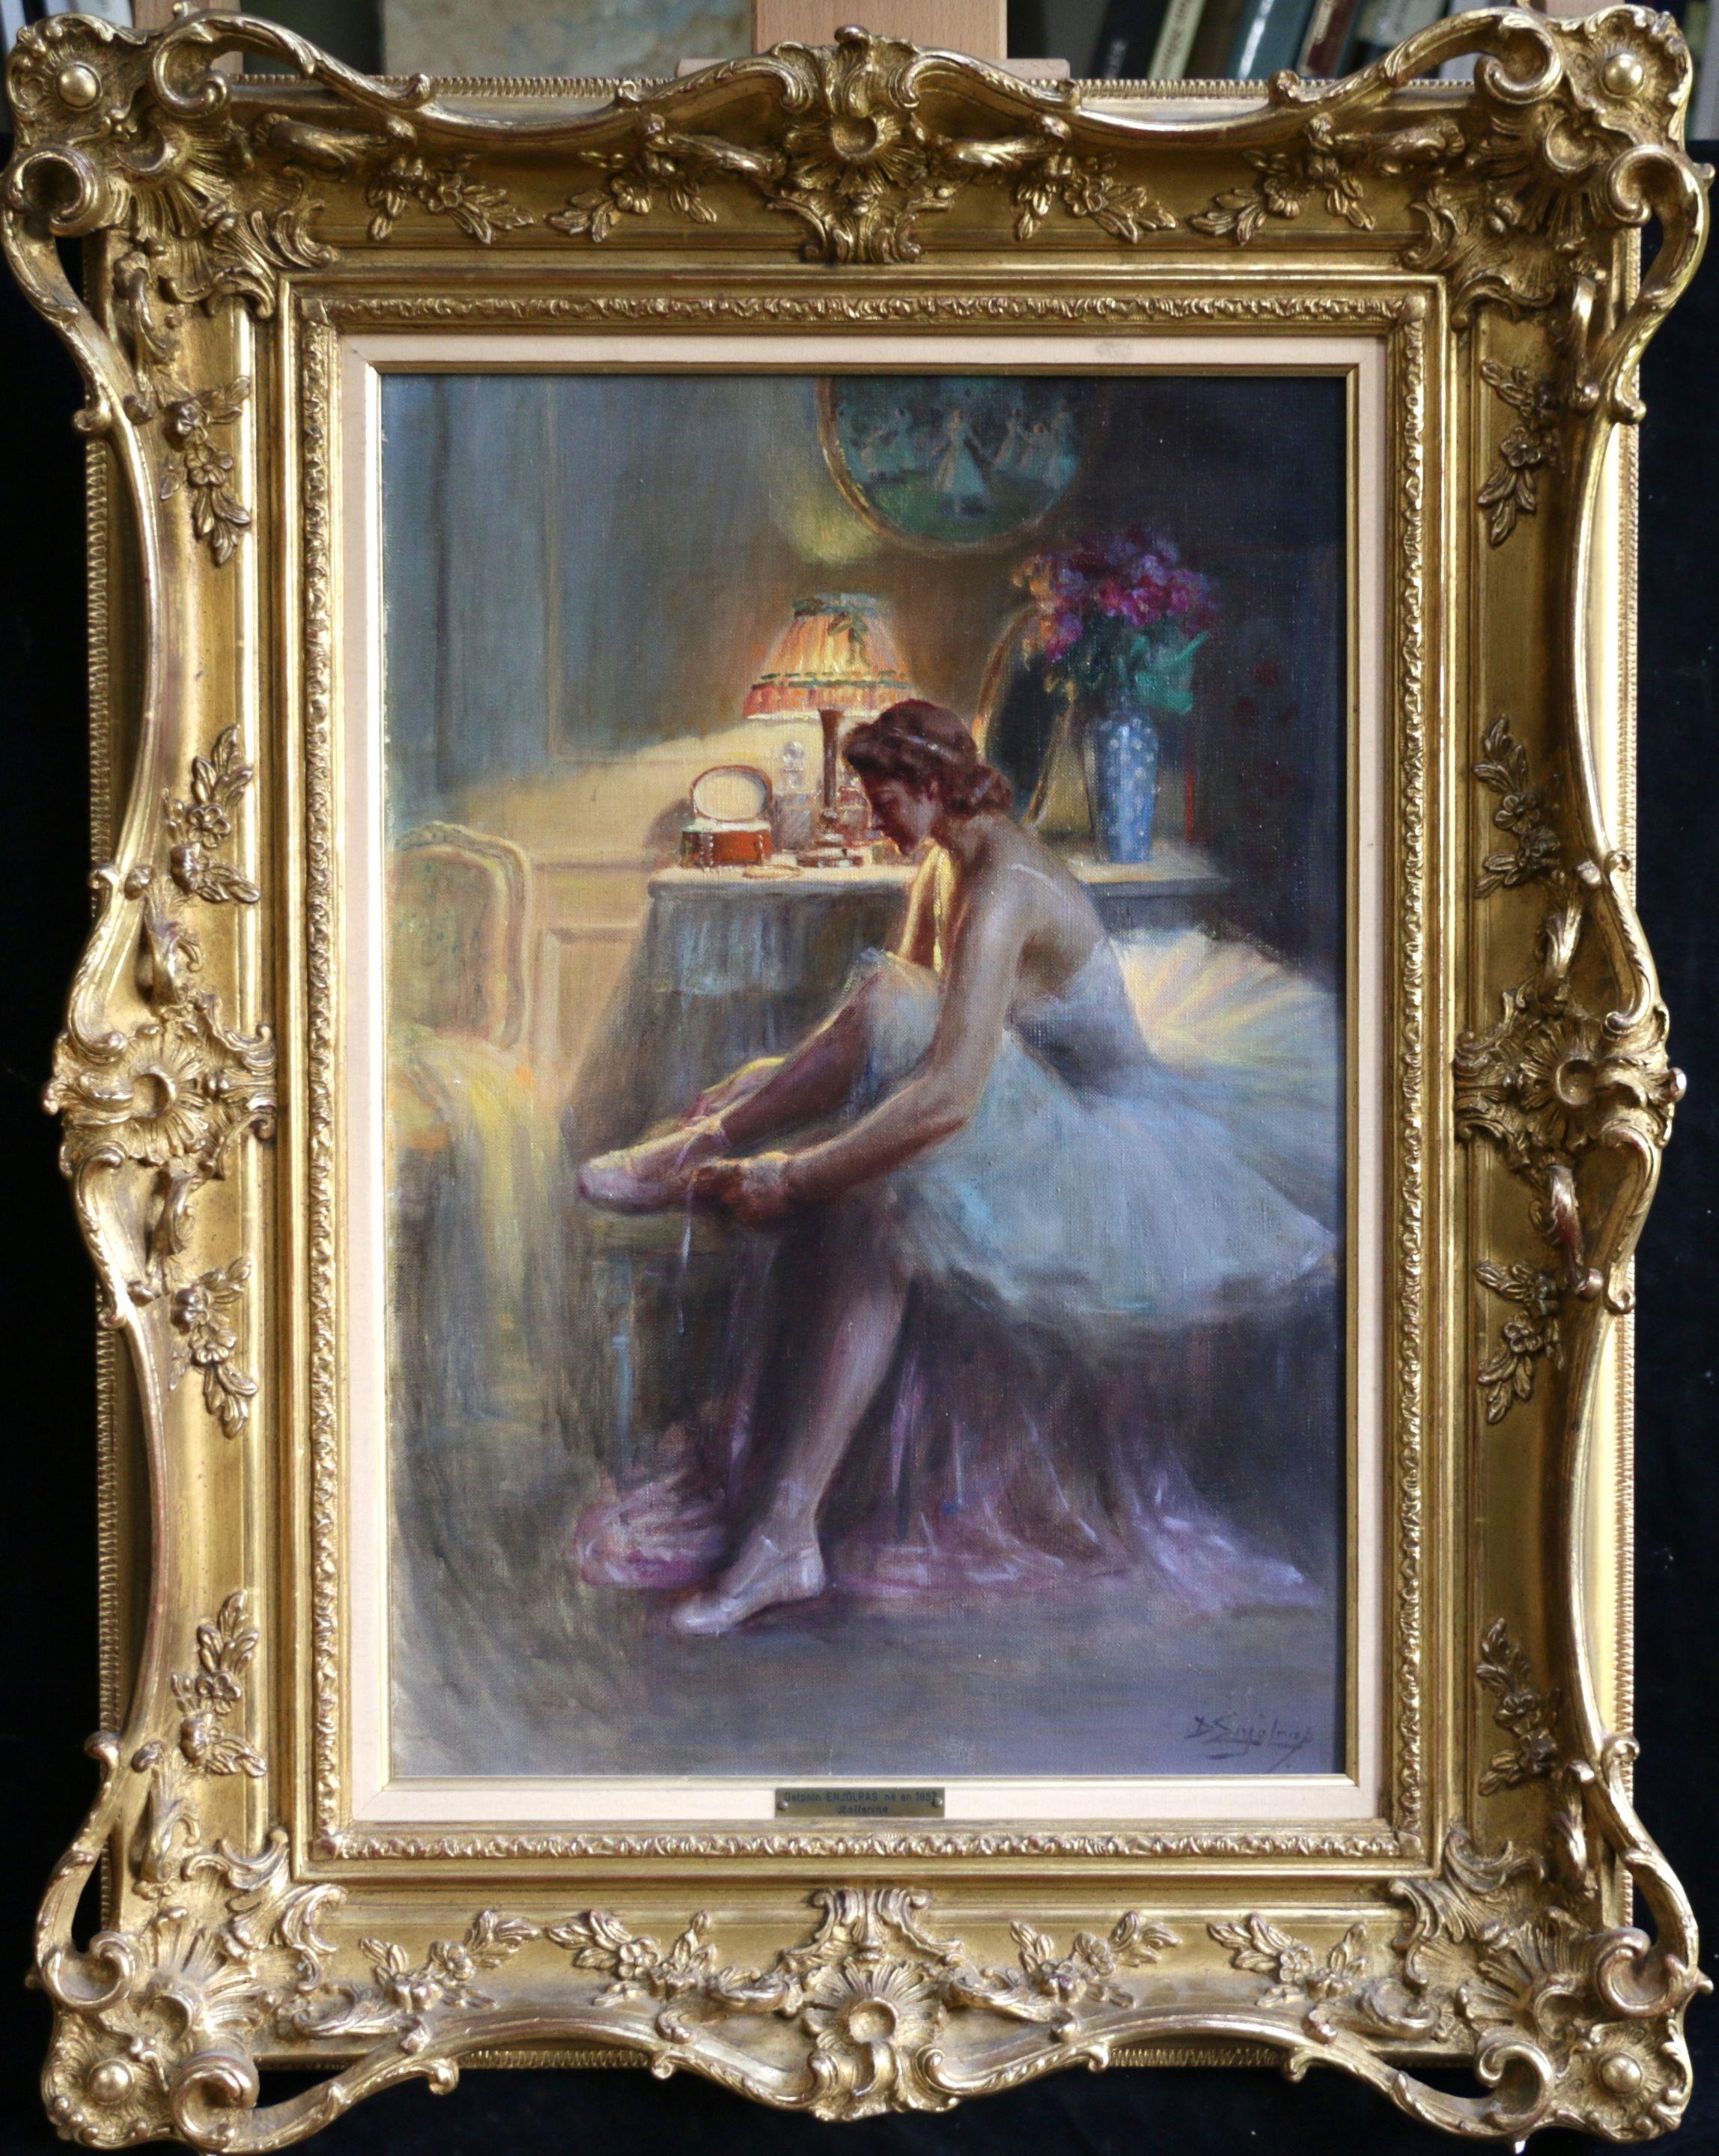 Femme Portant des Bas-19th Century Oil, Ballerina figure in Interior by Enjolras - Painting by Delphin Enjolras